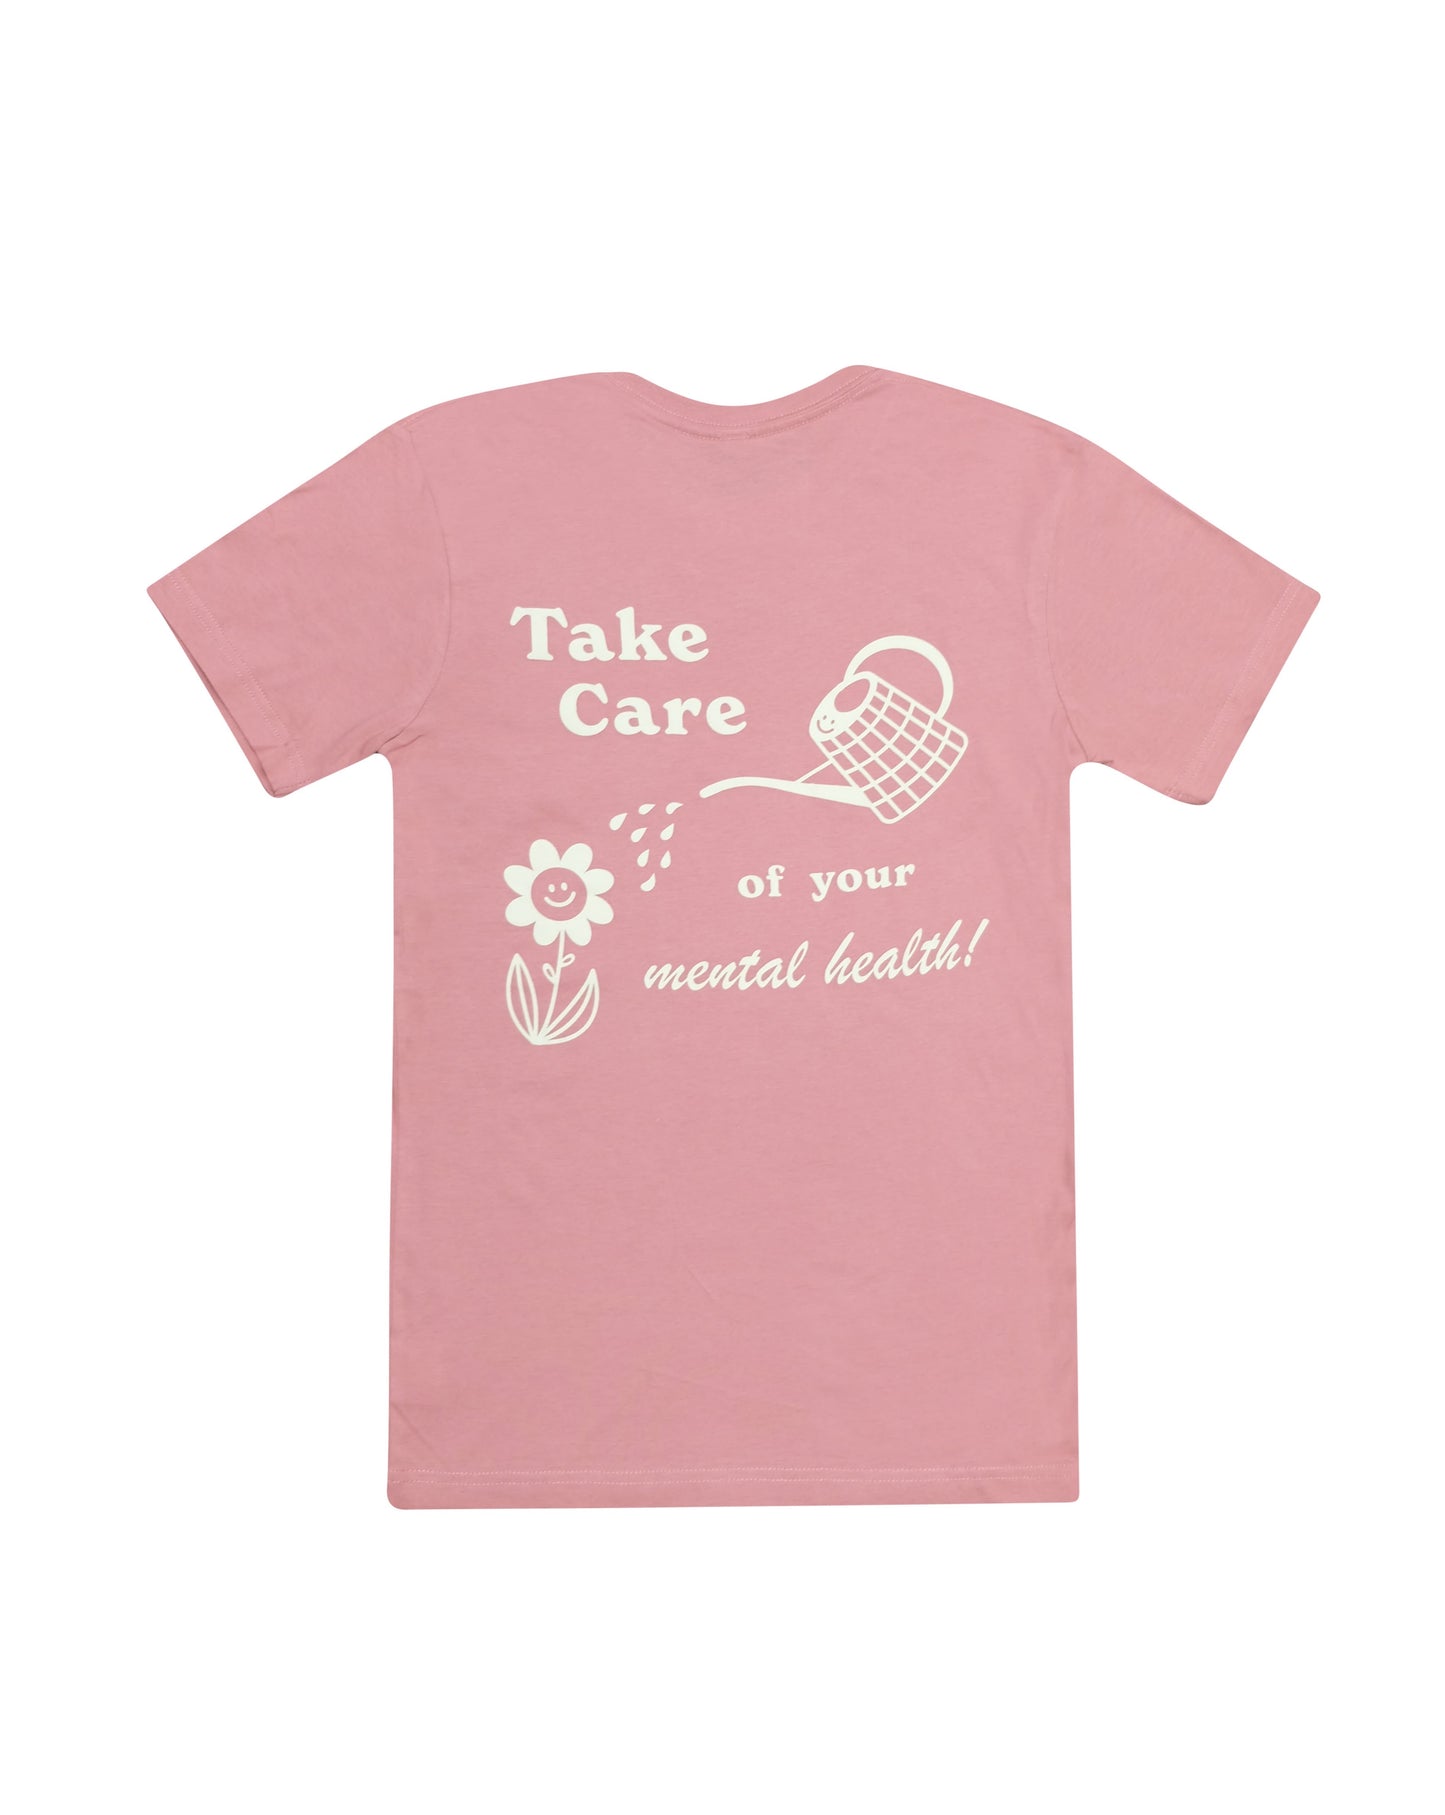 Take care of your mental health! T-SHIRT - Rose